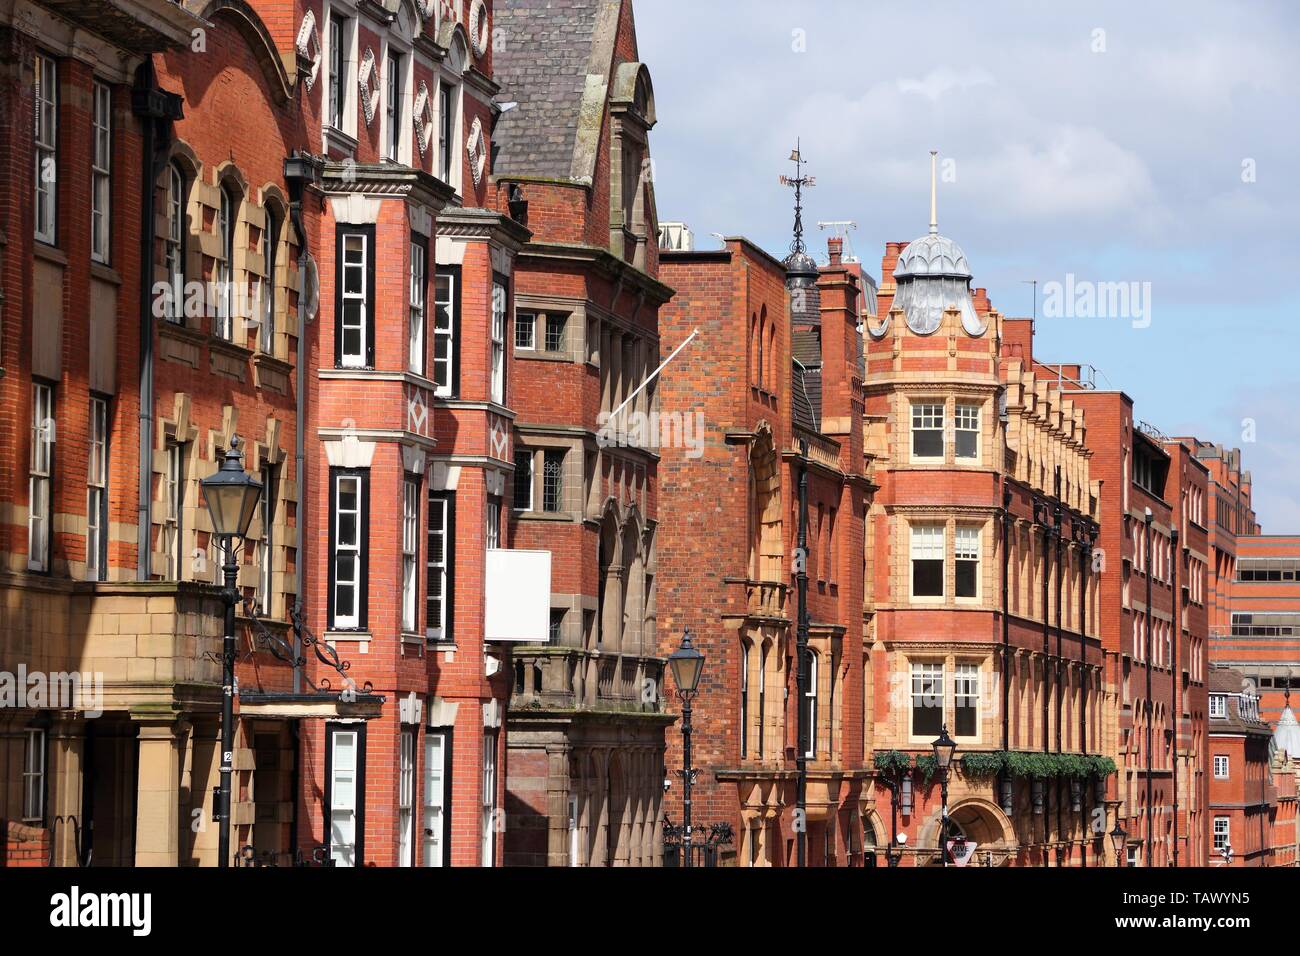 Birmingham, UK - street view with old brick townhouse architecture. Stock Photo